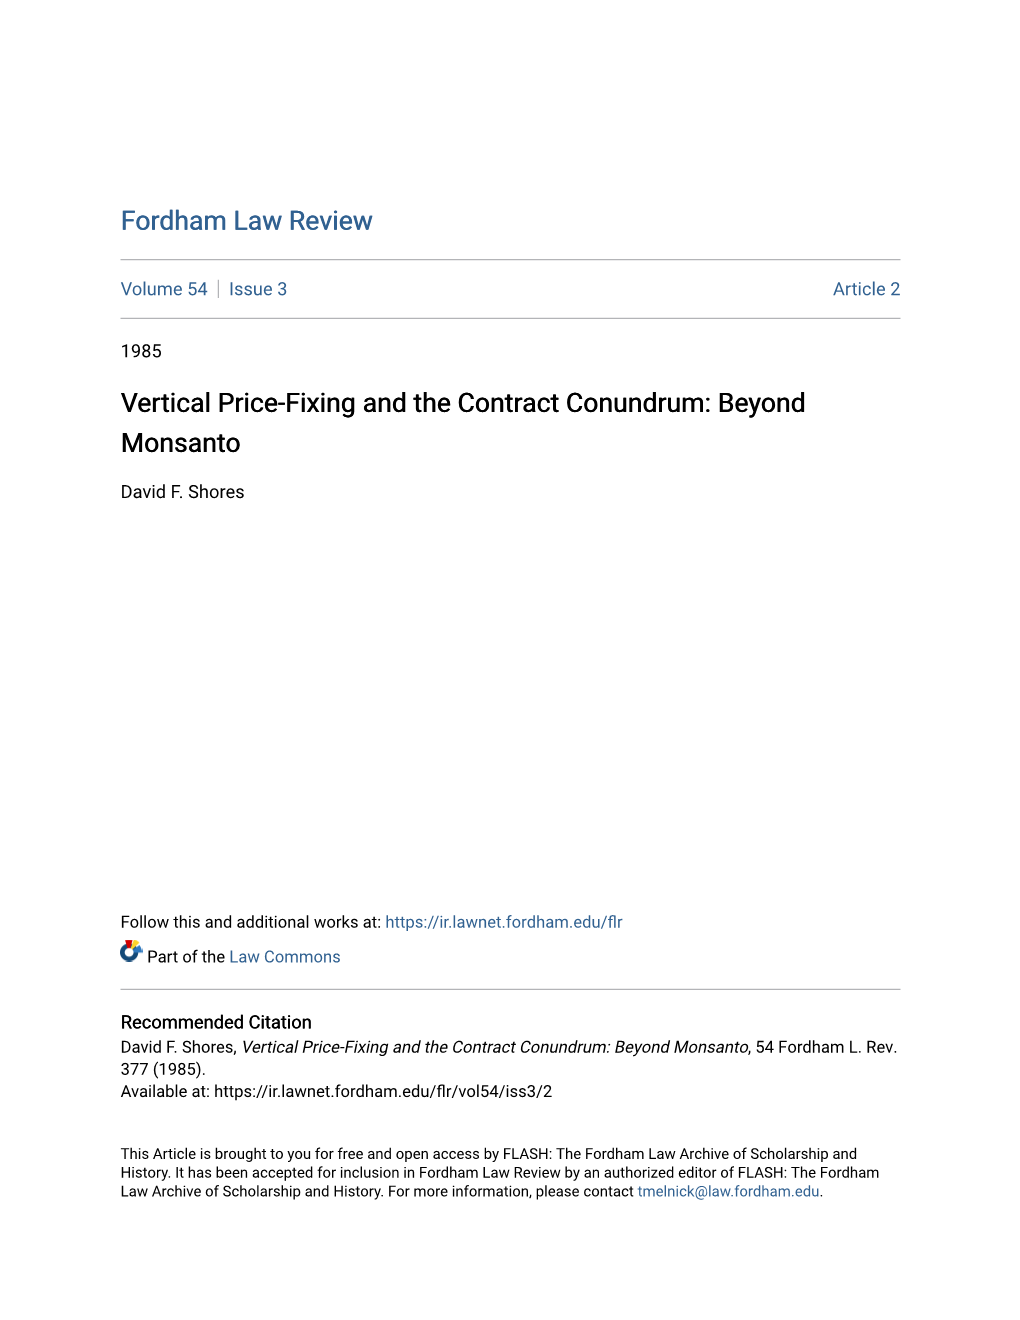 Vertical Price-Fixing and the Contract Conundrum: Beyond Monsanto